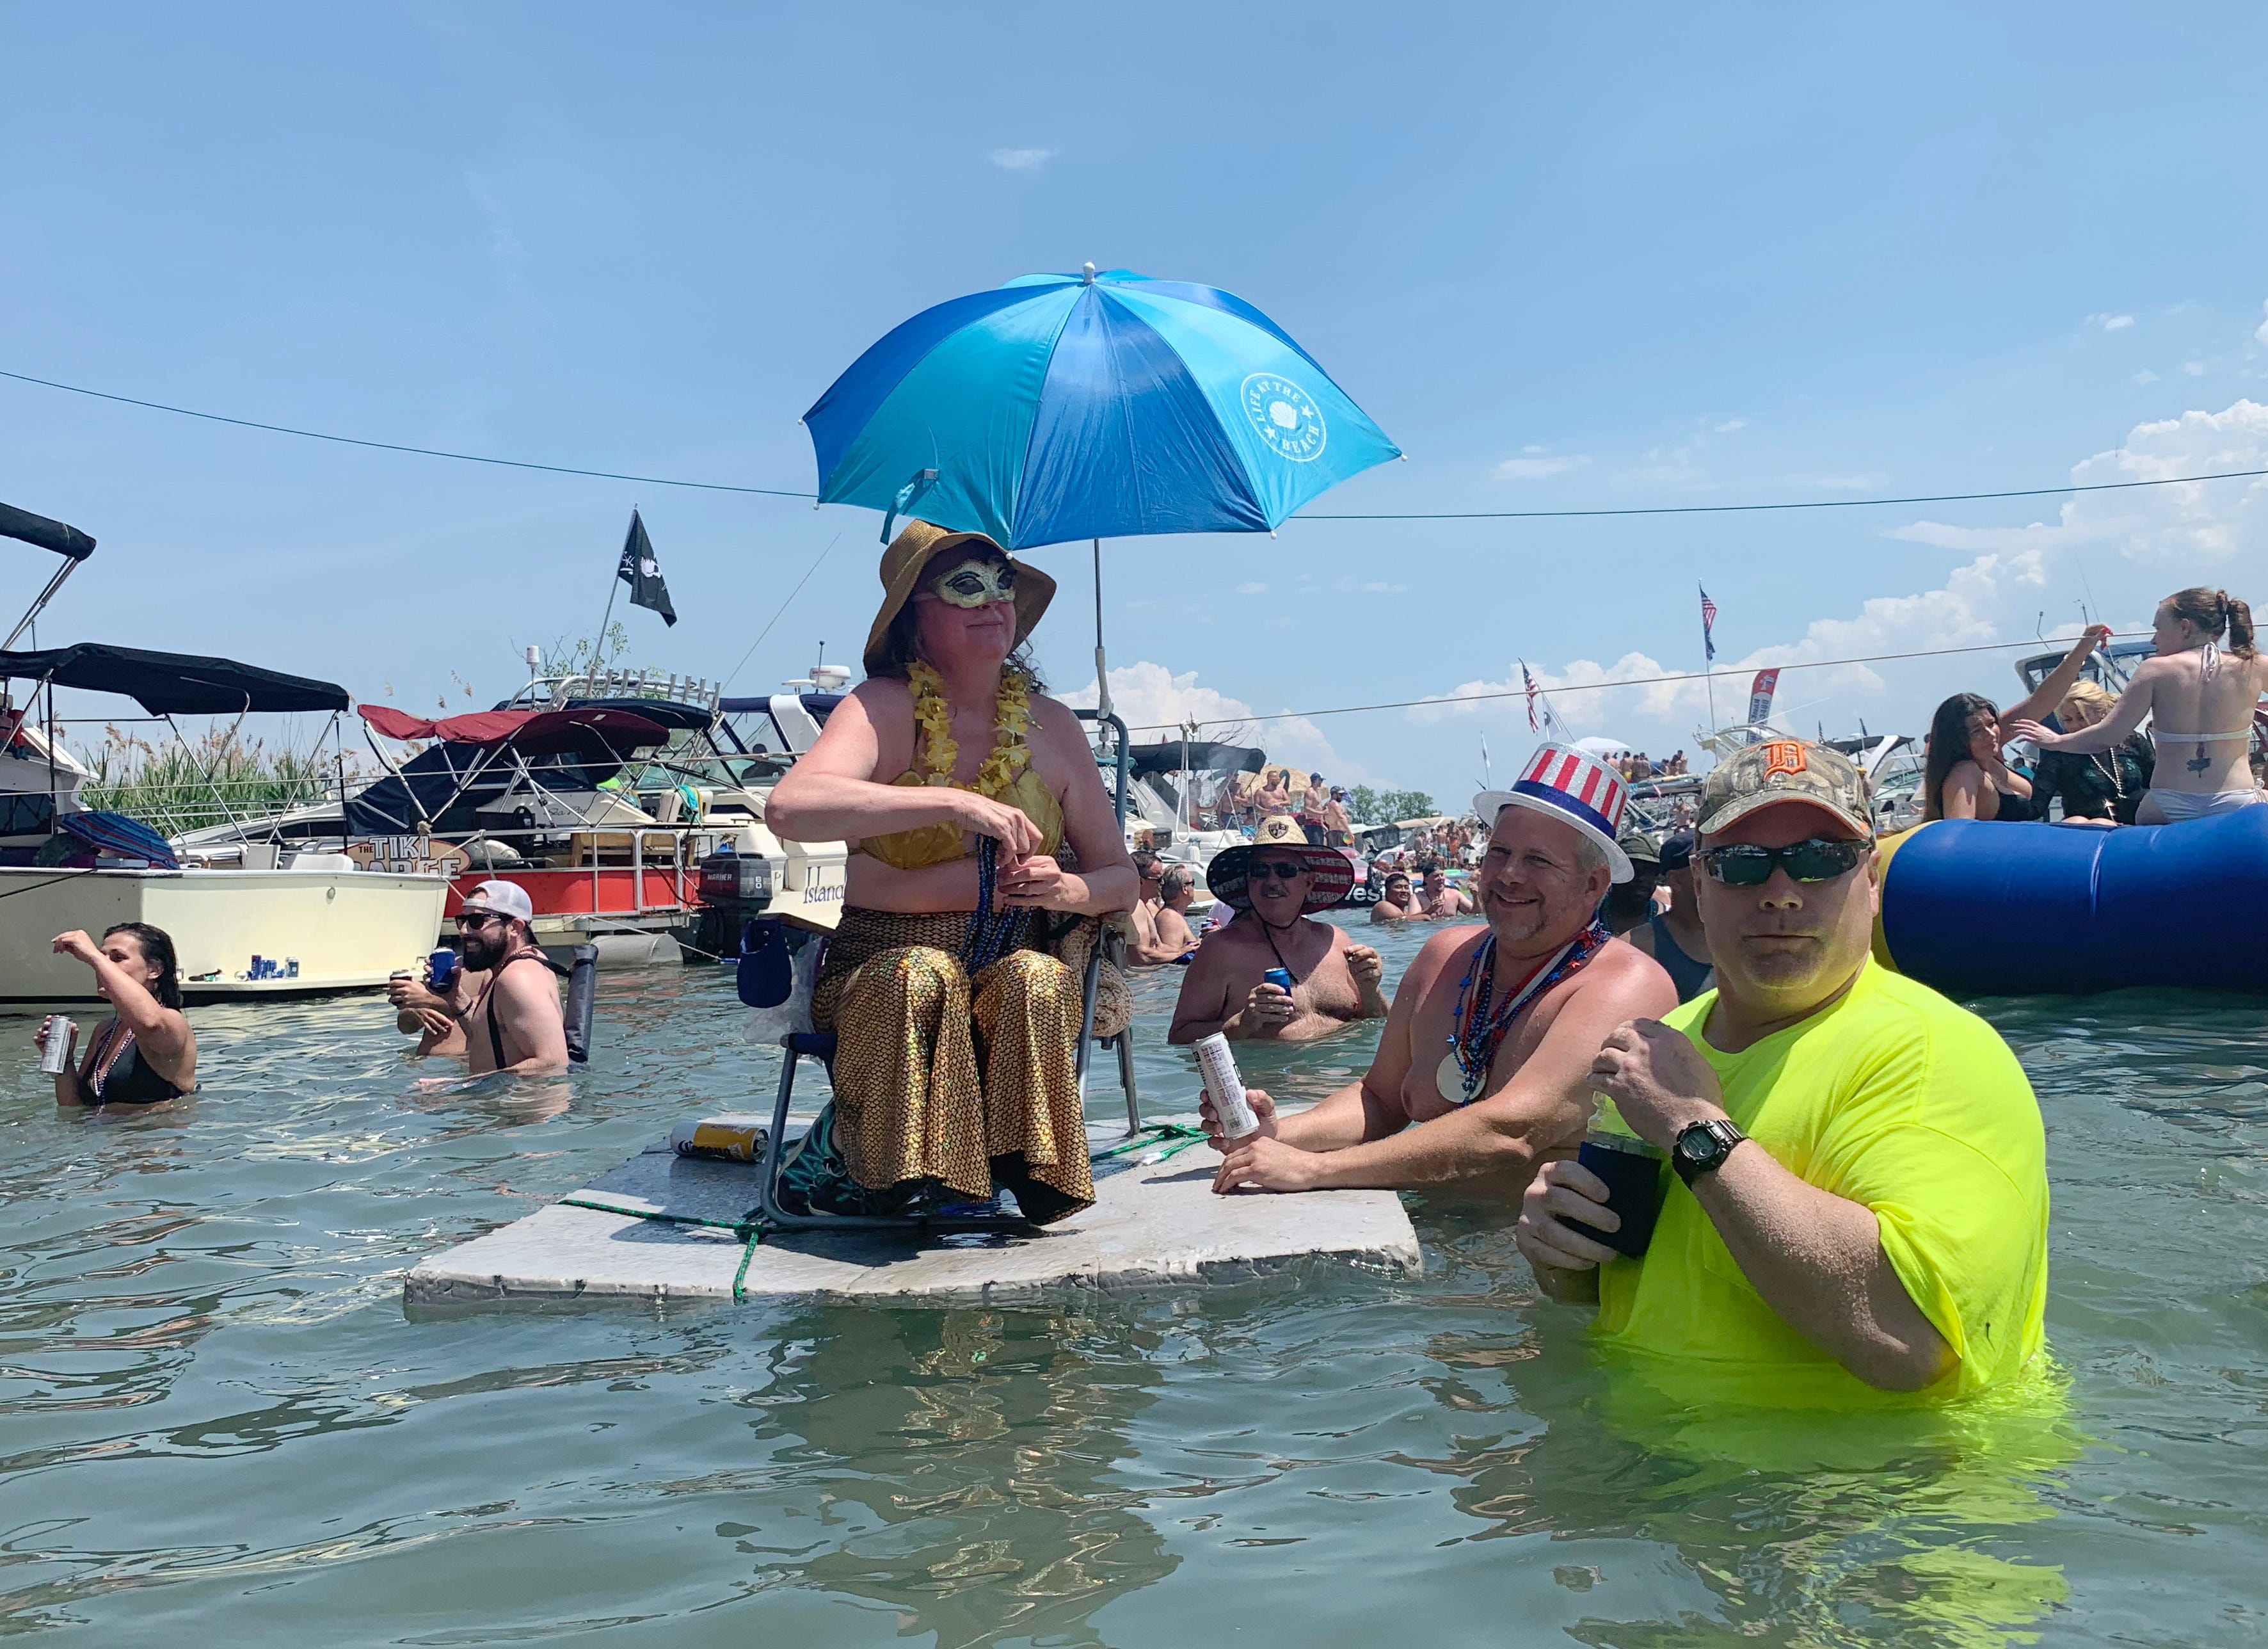 A Jobbie Nooner reveler dressed as a mermaid floats in the shallow water surrounding Gull Island.